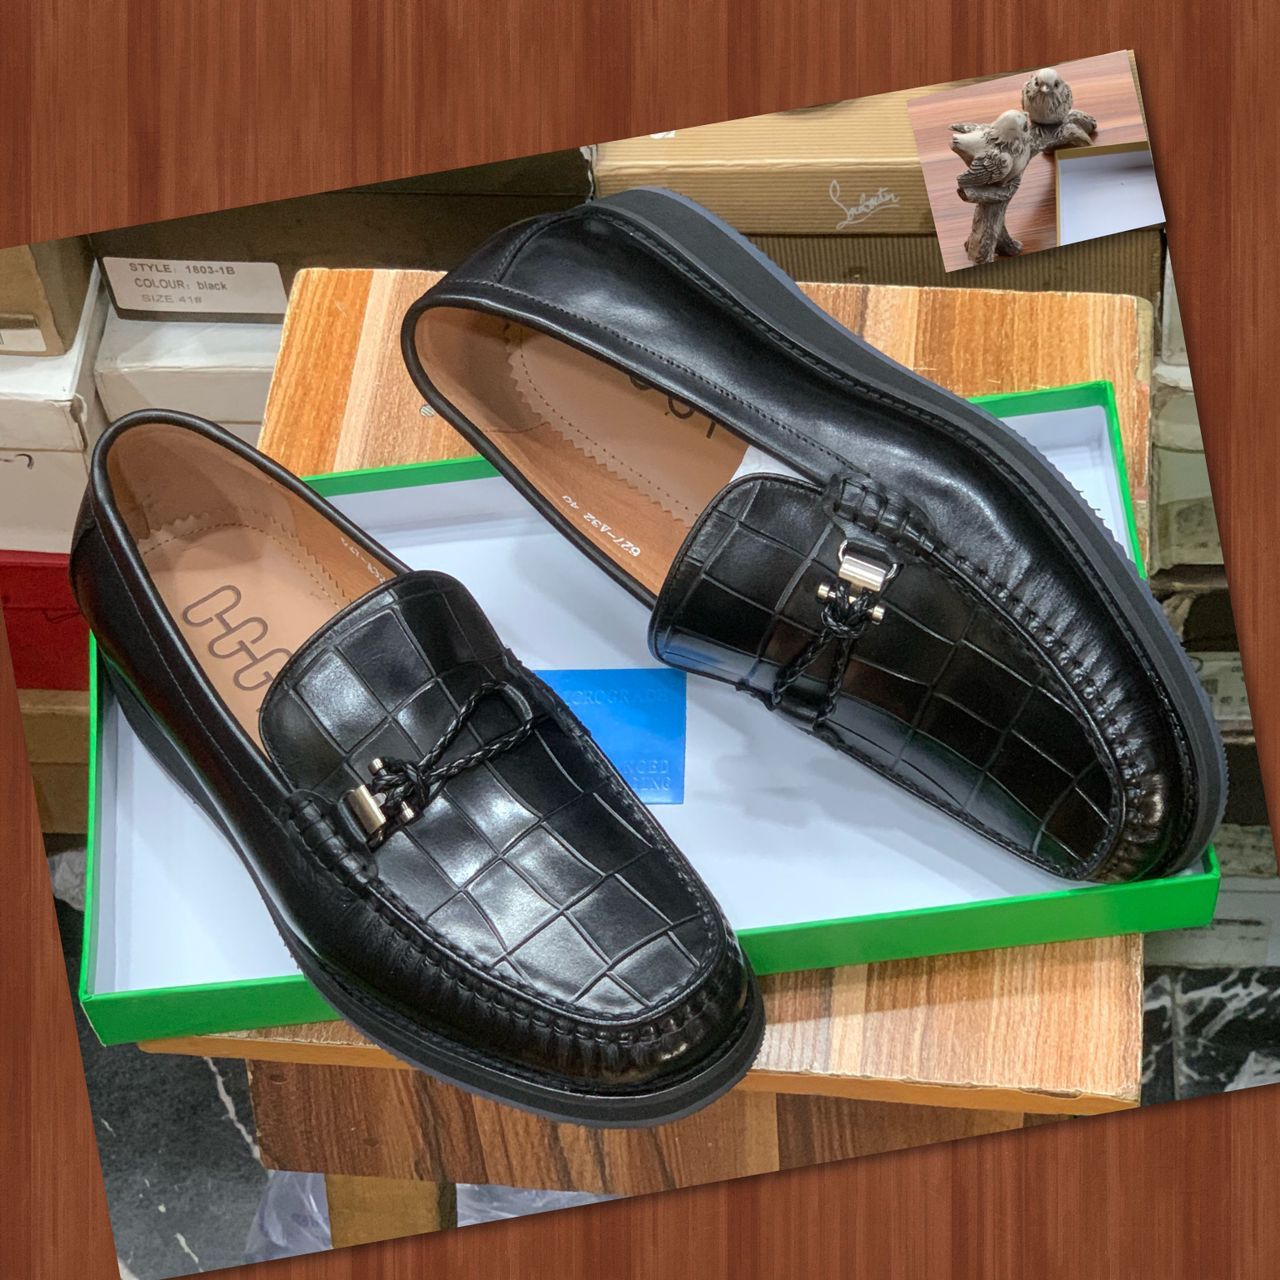 FASHION TEXTURED DESIGNERS LOAFER SHOES for CartRollers Marketplace For Shopping Online, Fashion, Electronics, Phones, Computers and Buy Men Shoe, Home Appliances, Kitchen-wares, Groceries Accessories, ankara, Aso-Ebi, Beads, Boys Casual Wears, Children Children's Wears ,Corporate Shoes, Cosmetics Dress ,Dresses Fashion, Girls' Dresses ,Girls' Wears, Hair Care ,Jewelries ,Jewelry Kids, Kids' Fashion Ladies ,Wears Lapel Pins, Loafers Shoe Men ,Men's Caftan, Men's Casual Shoes, Men's Fashion, Men's Shoes, Men's Wears, Moccasin Shoe, Natural Hair, In Lagos Nigeria